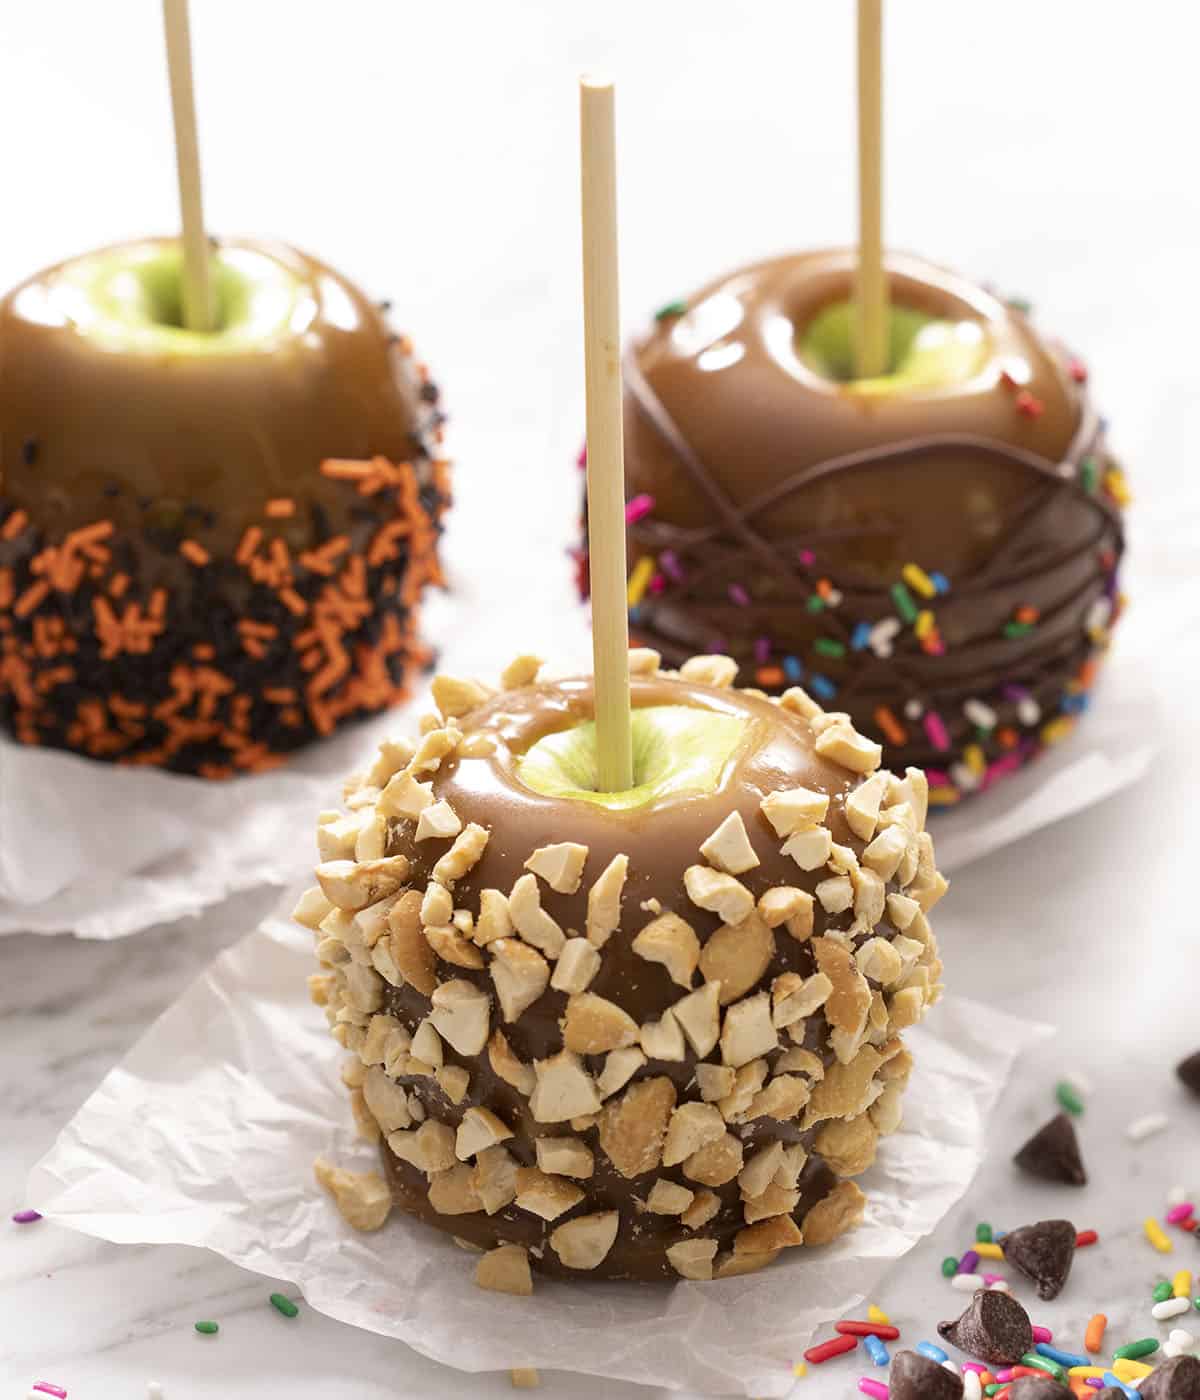 Three caramel apples decorated with chocolate nuts and sprinkles.